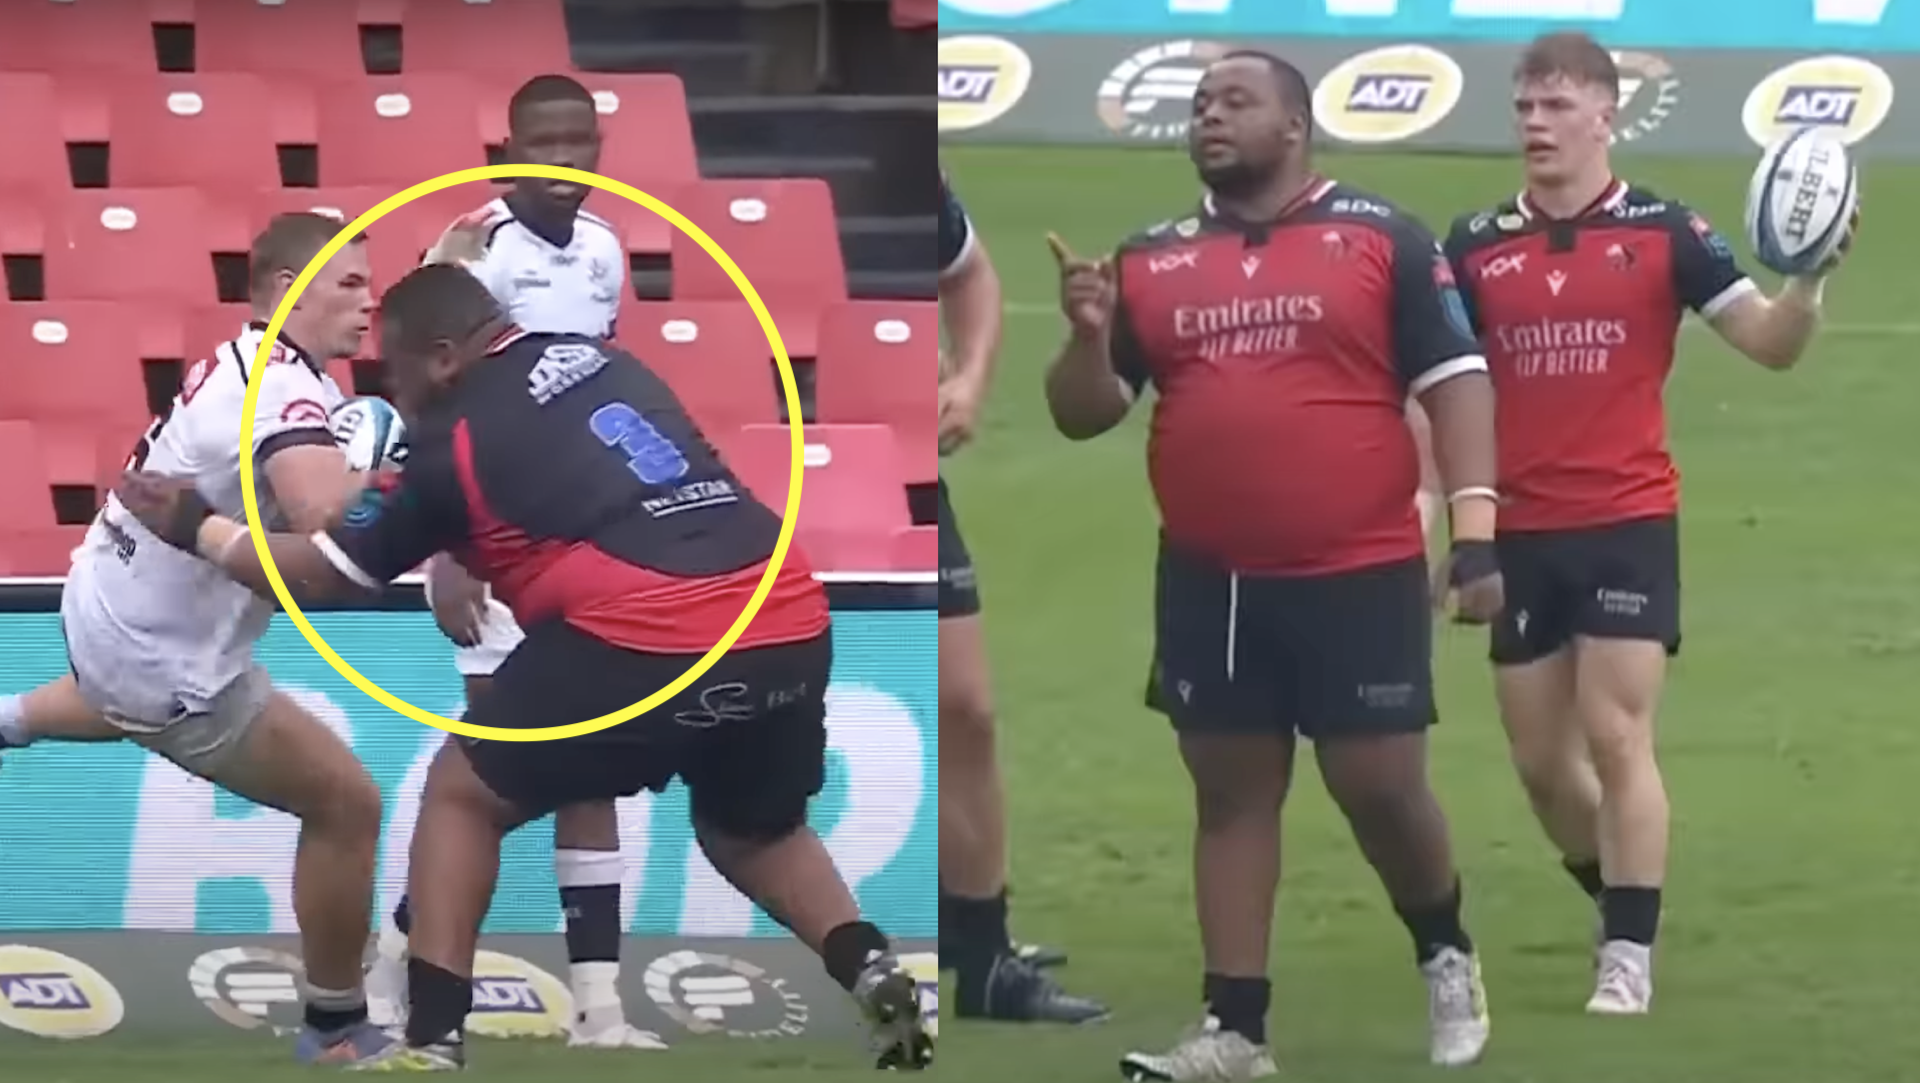 Junior Bok uses all of his 153kg frame to pulverise flanker